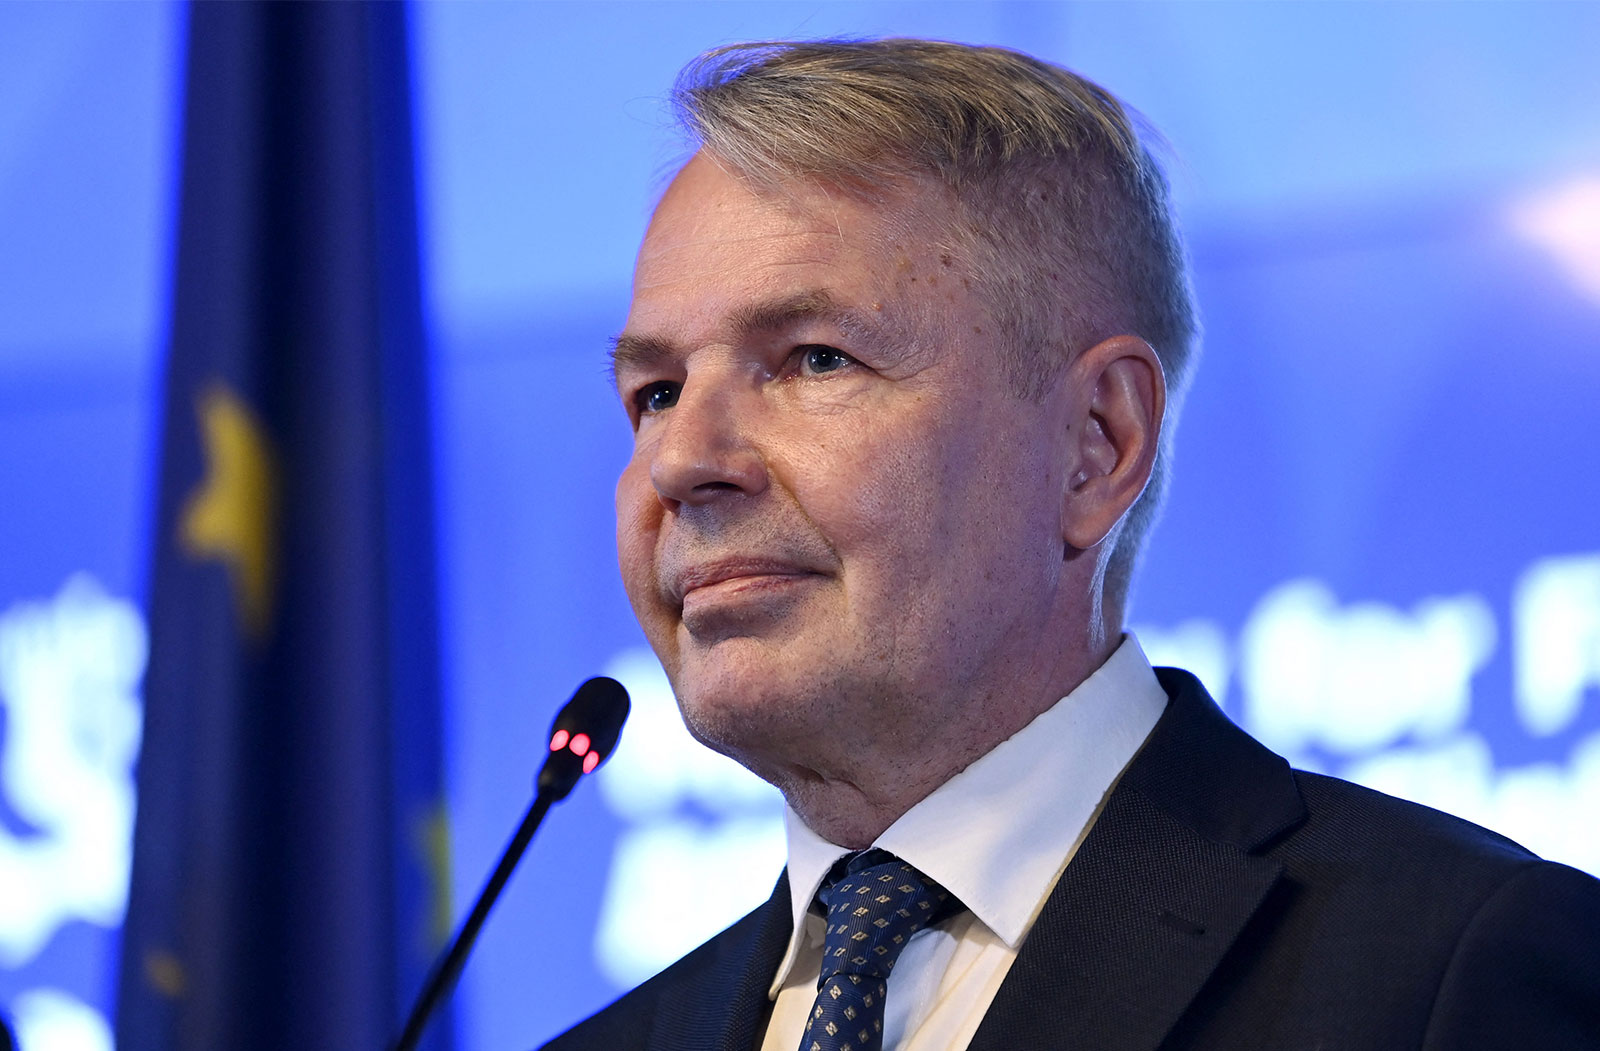 Finland's Foreign Minister Pekka Haavisto addresses a joint press conference with his French counterpart in Helsinki, Finland, on March 31. 